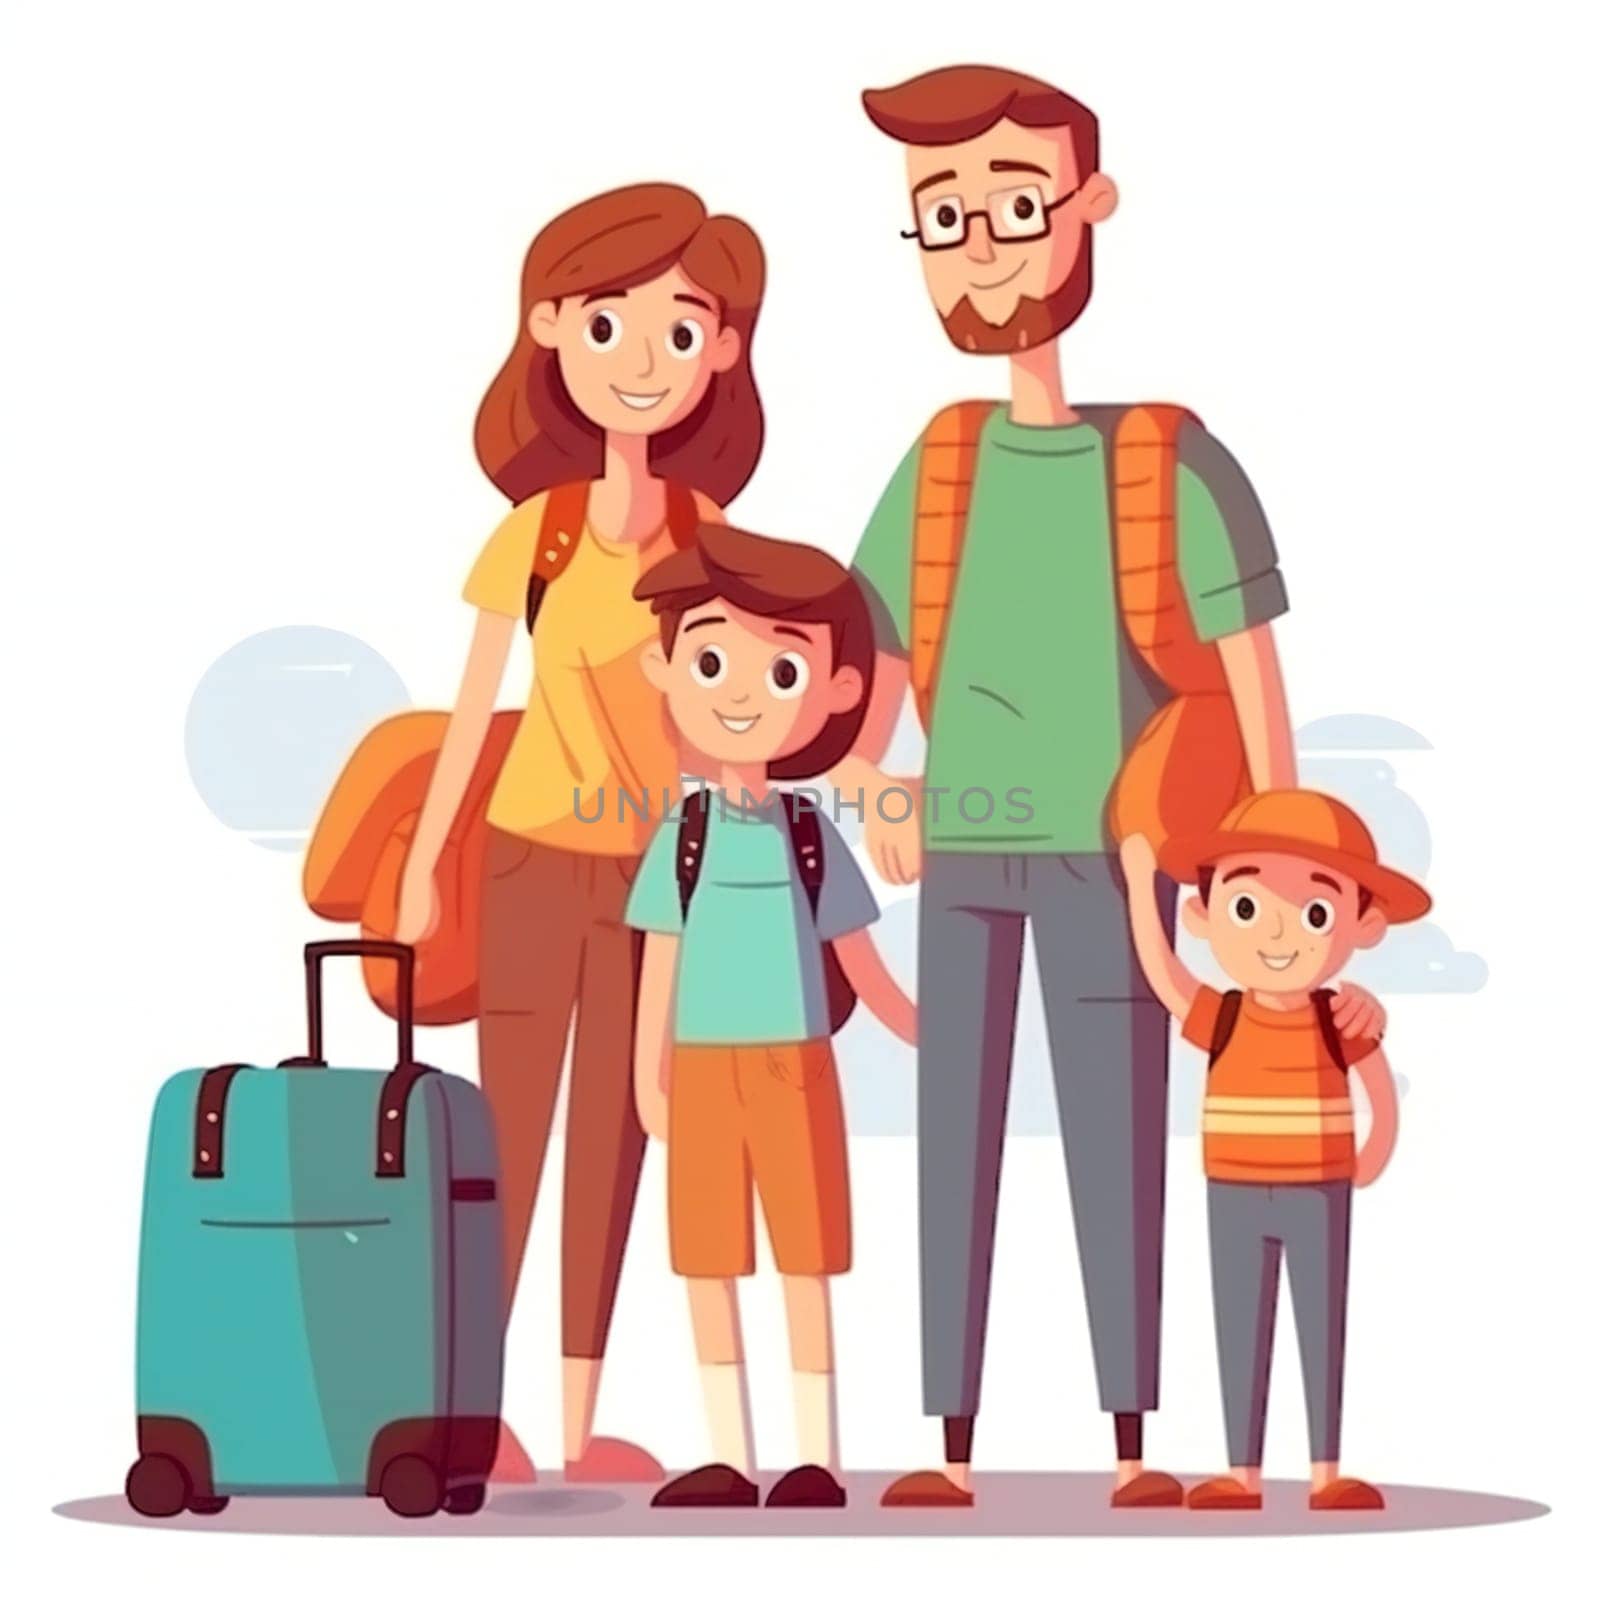 Happy Family travel together. Parents with children at the airport. Smiling man with luggage